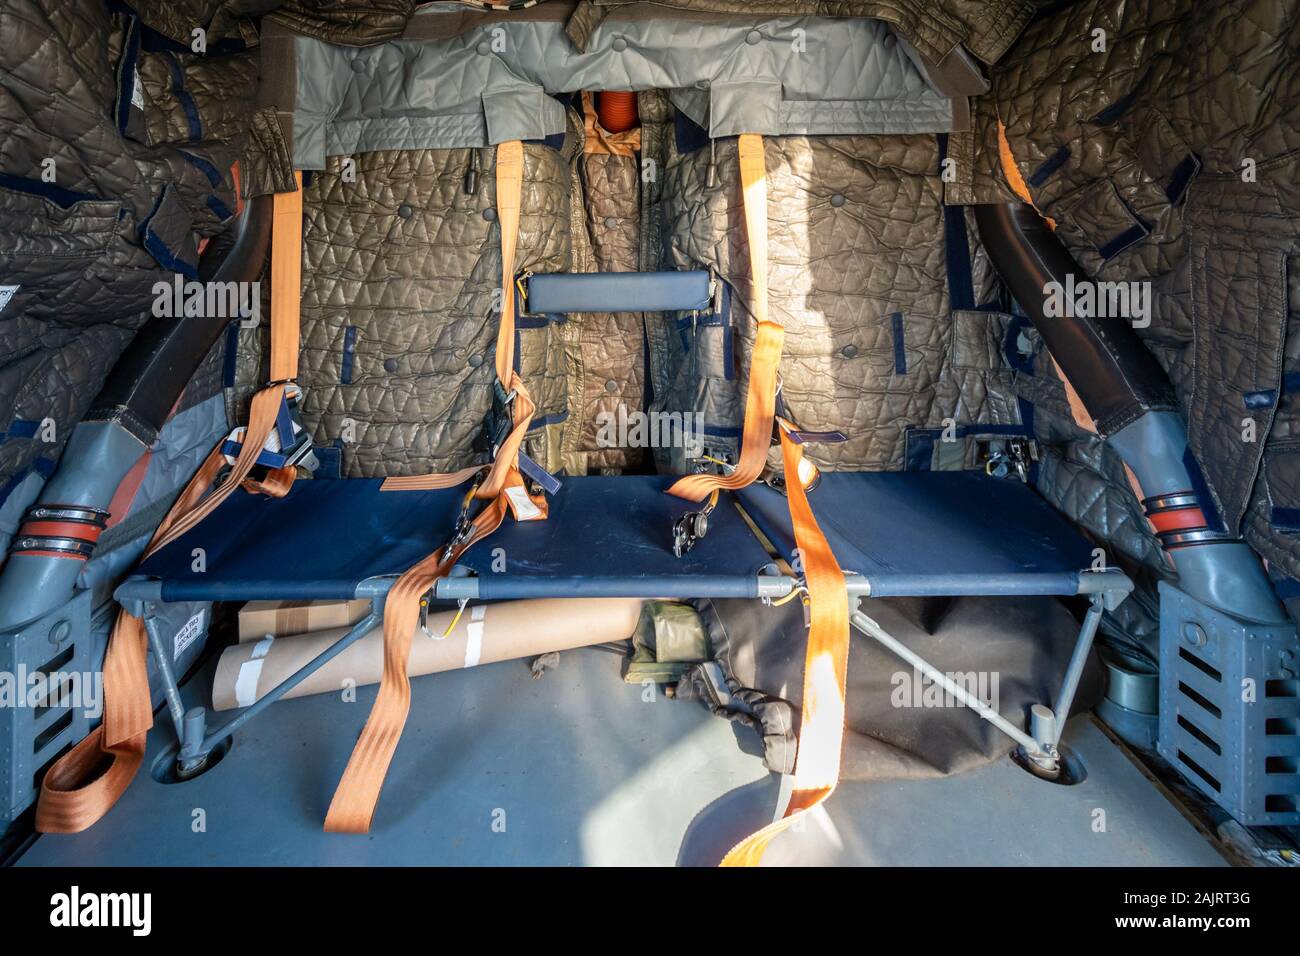 Interior of a Westland Lynx AH7 ZD280 helicopter, UK Stock Photo